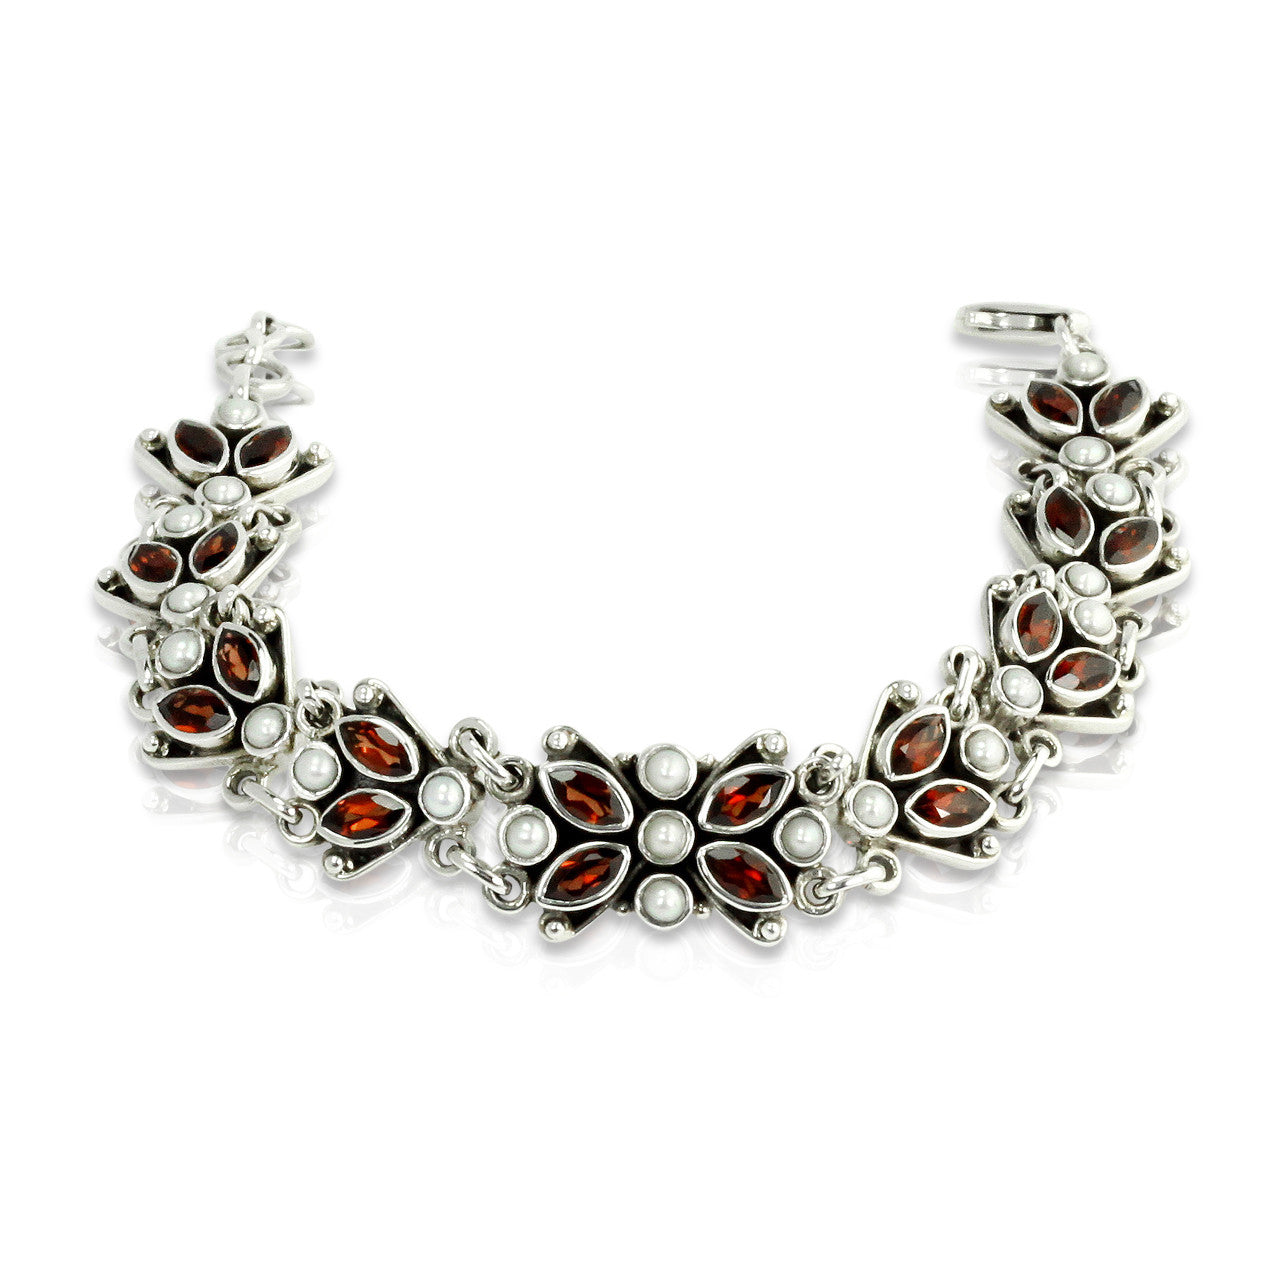 Himalayan Gems - Sterling Silver Jewelry & Gemstones Since 1983